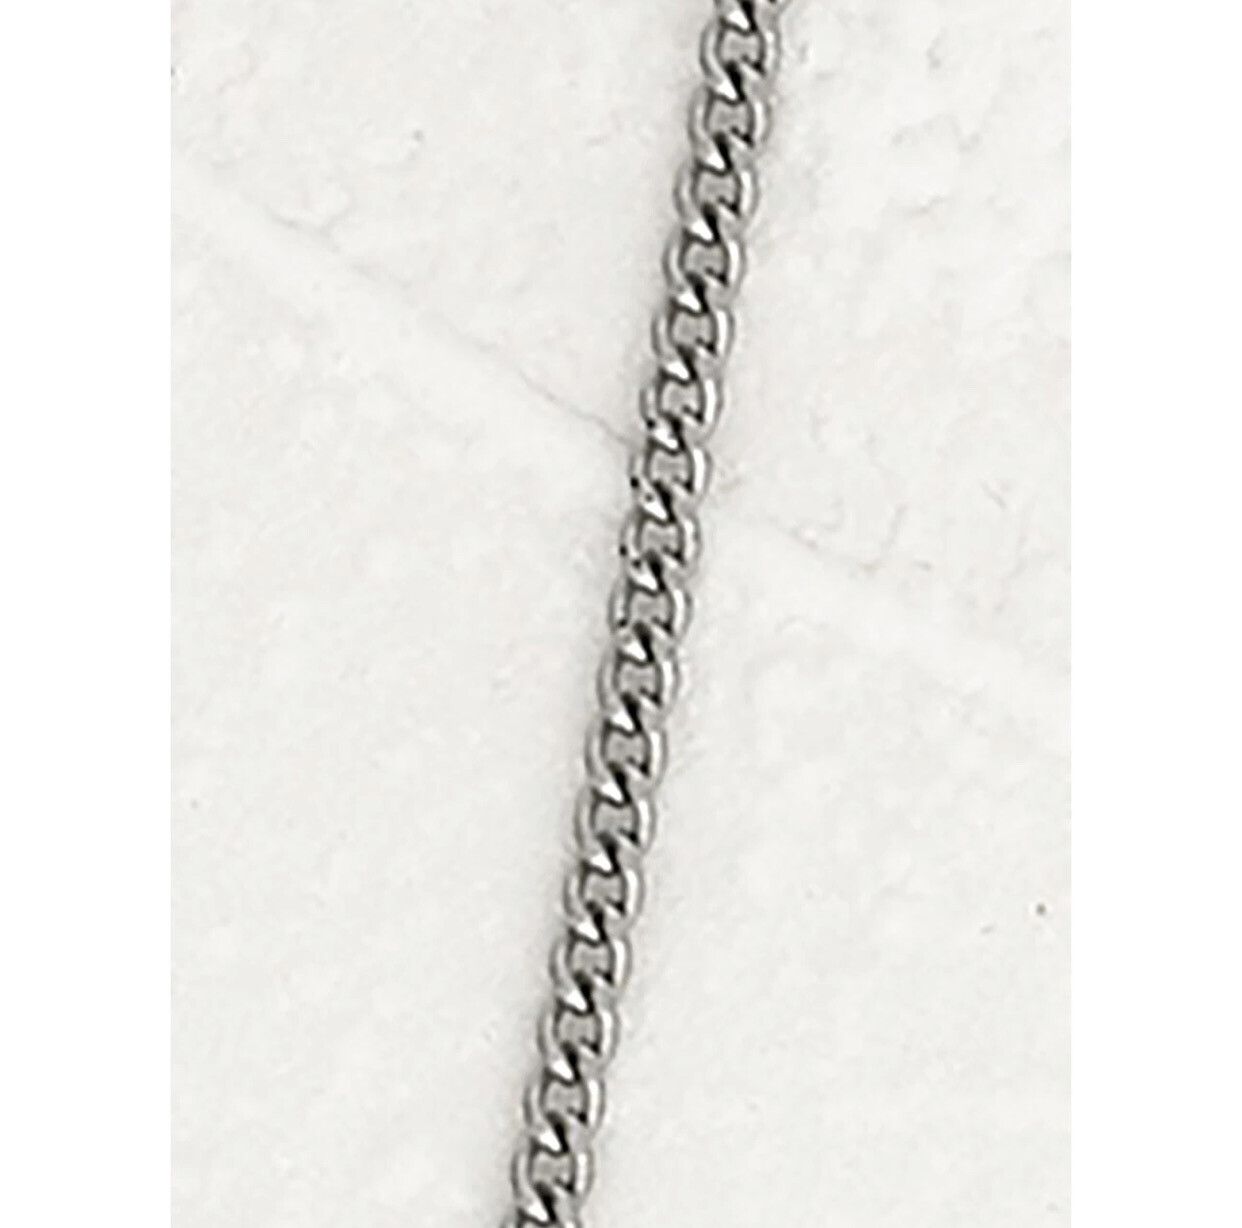 18" stainless chain CHAIN-18 3.99